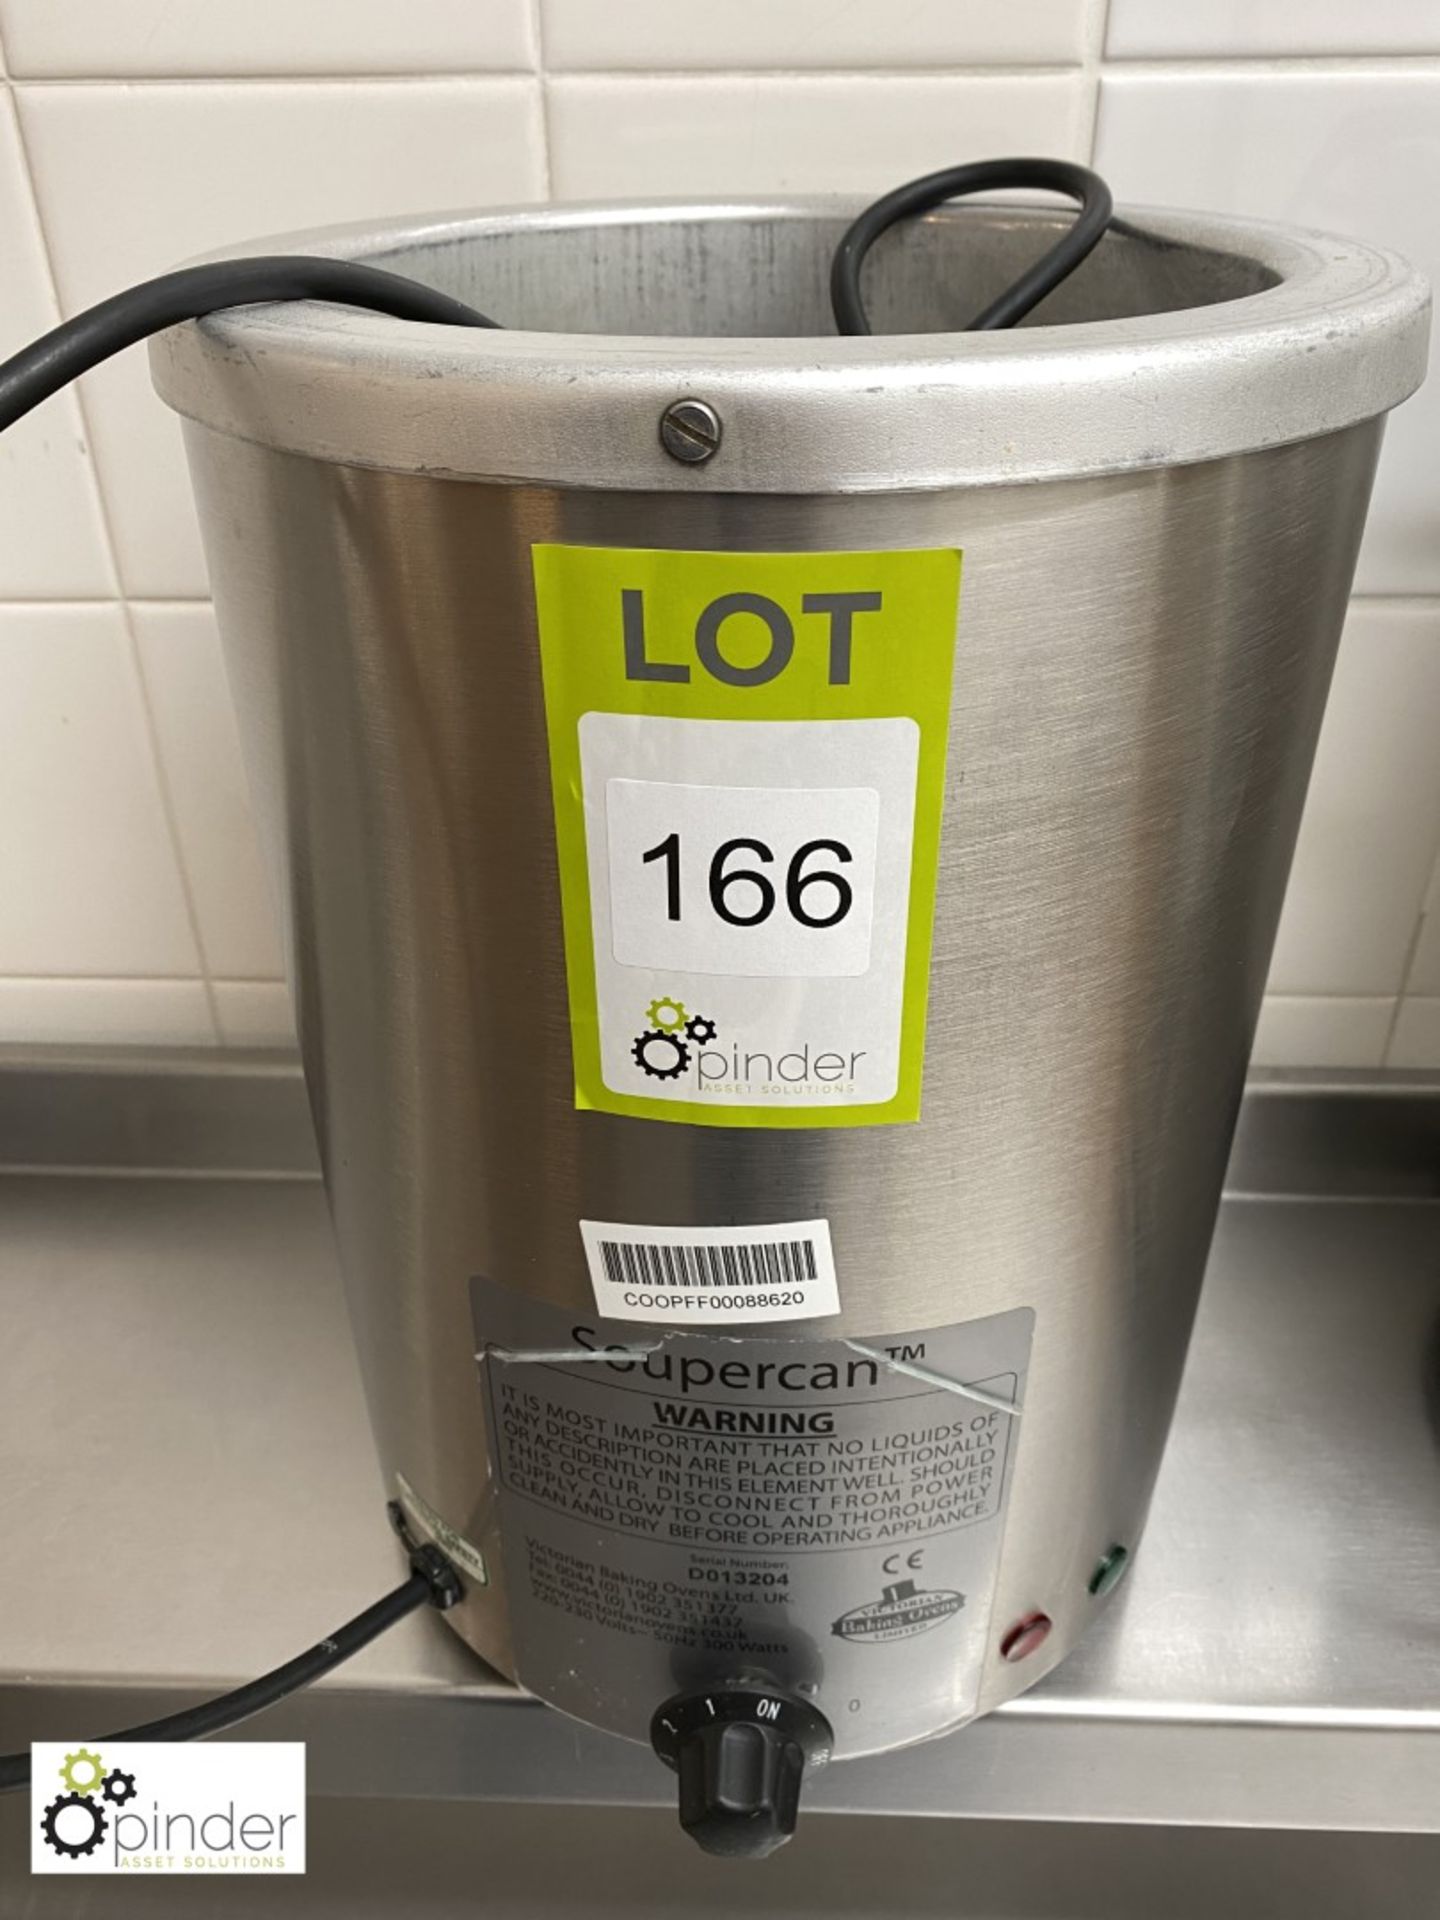 Soupercan Soup Kettle, 240volts (located in Main Kitchen)